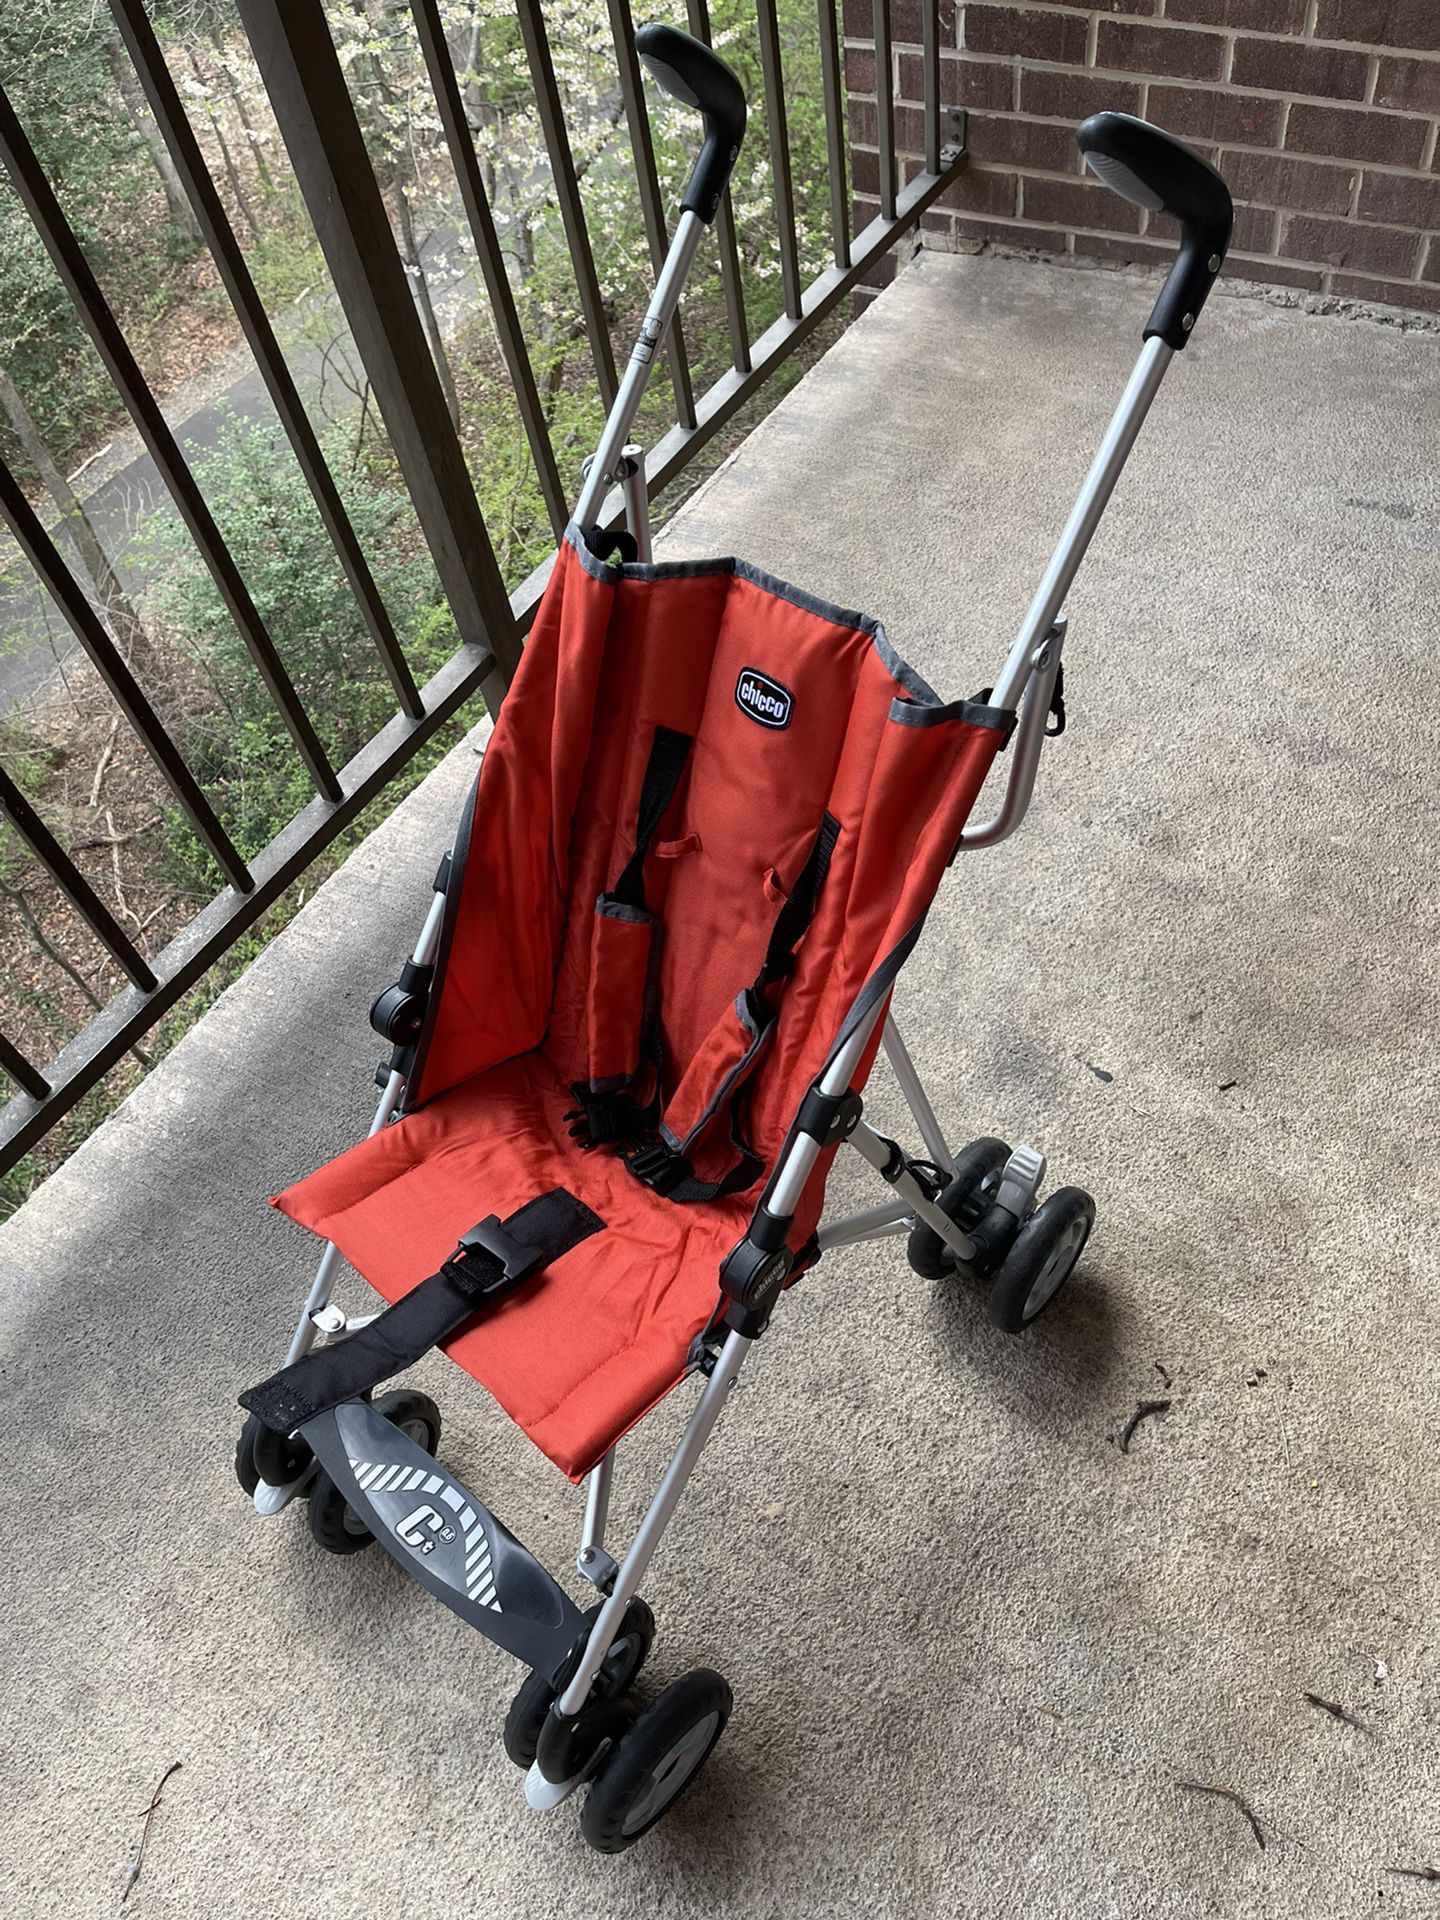 Chicco Portable Stroller With Removable Shade And Mesh Holder On Bottom